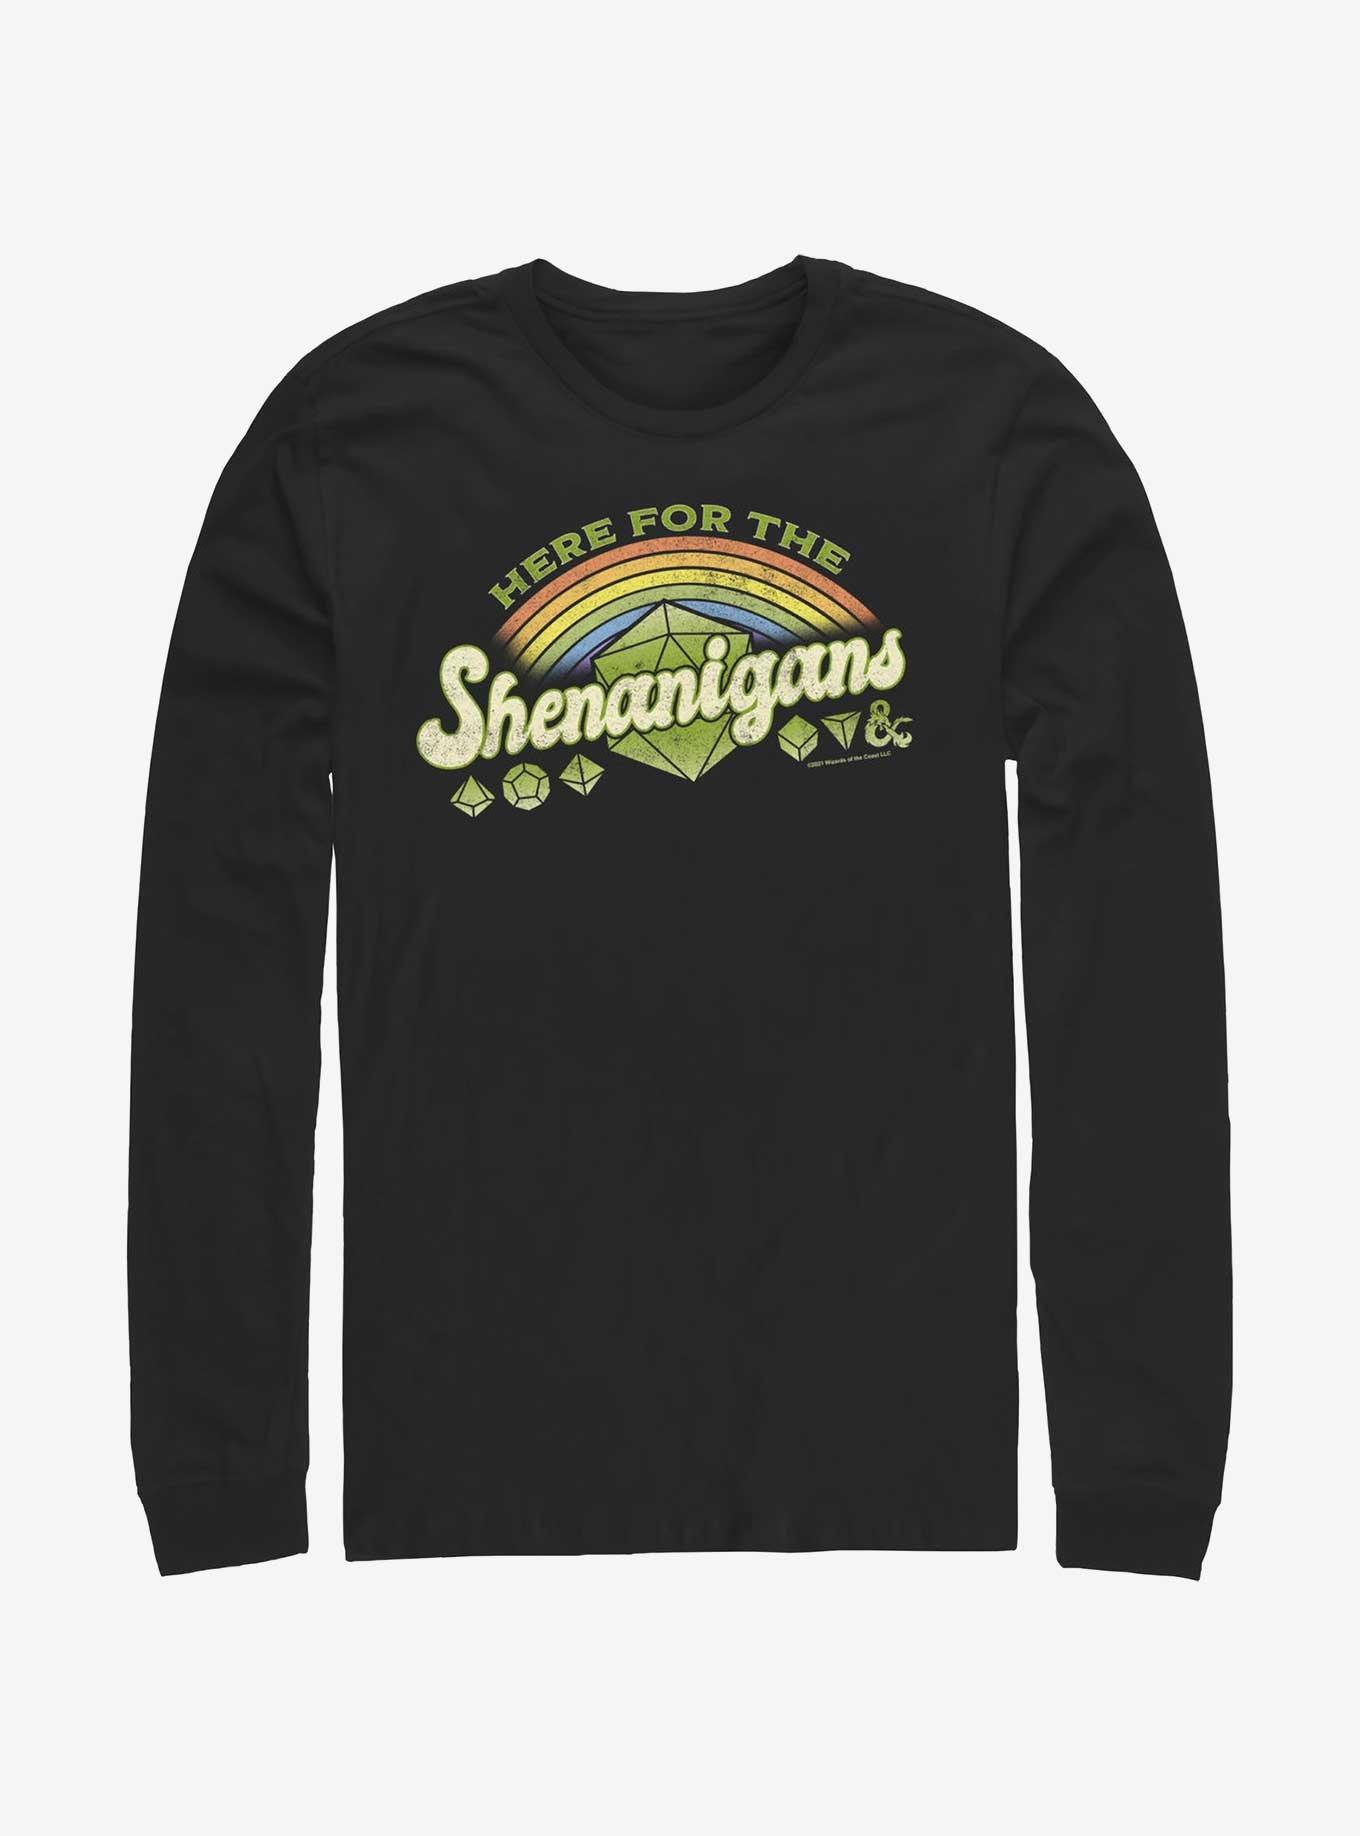 Dungeons And Dragons Here For Shenanigans Long-Sleeve T-Shirt